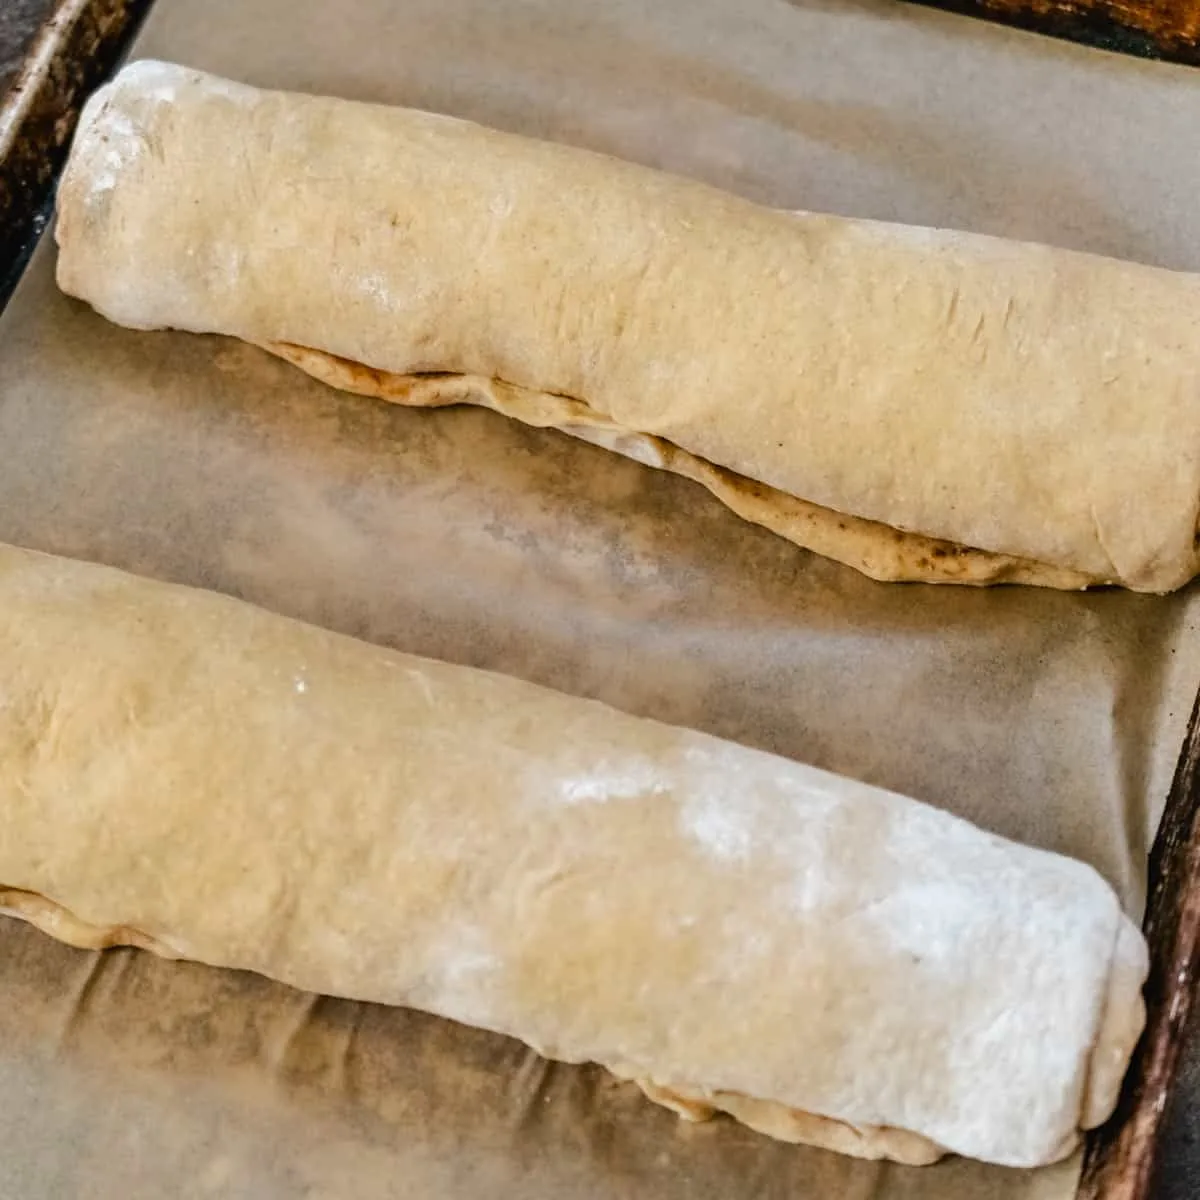 Two loaves of uncooked rolled up cinnamon dough on a baking sheet.